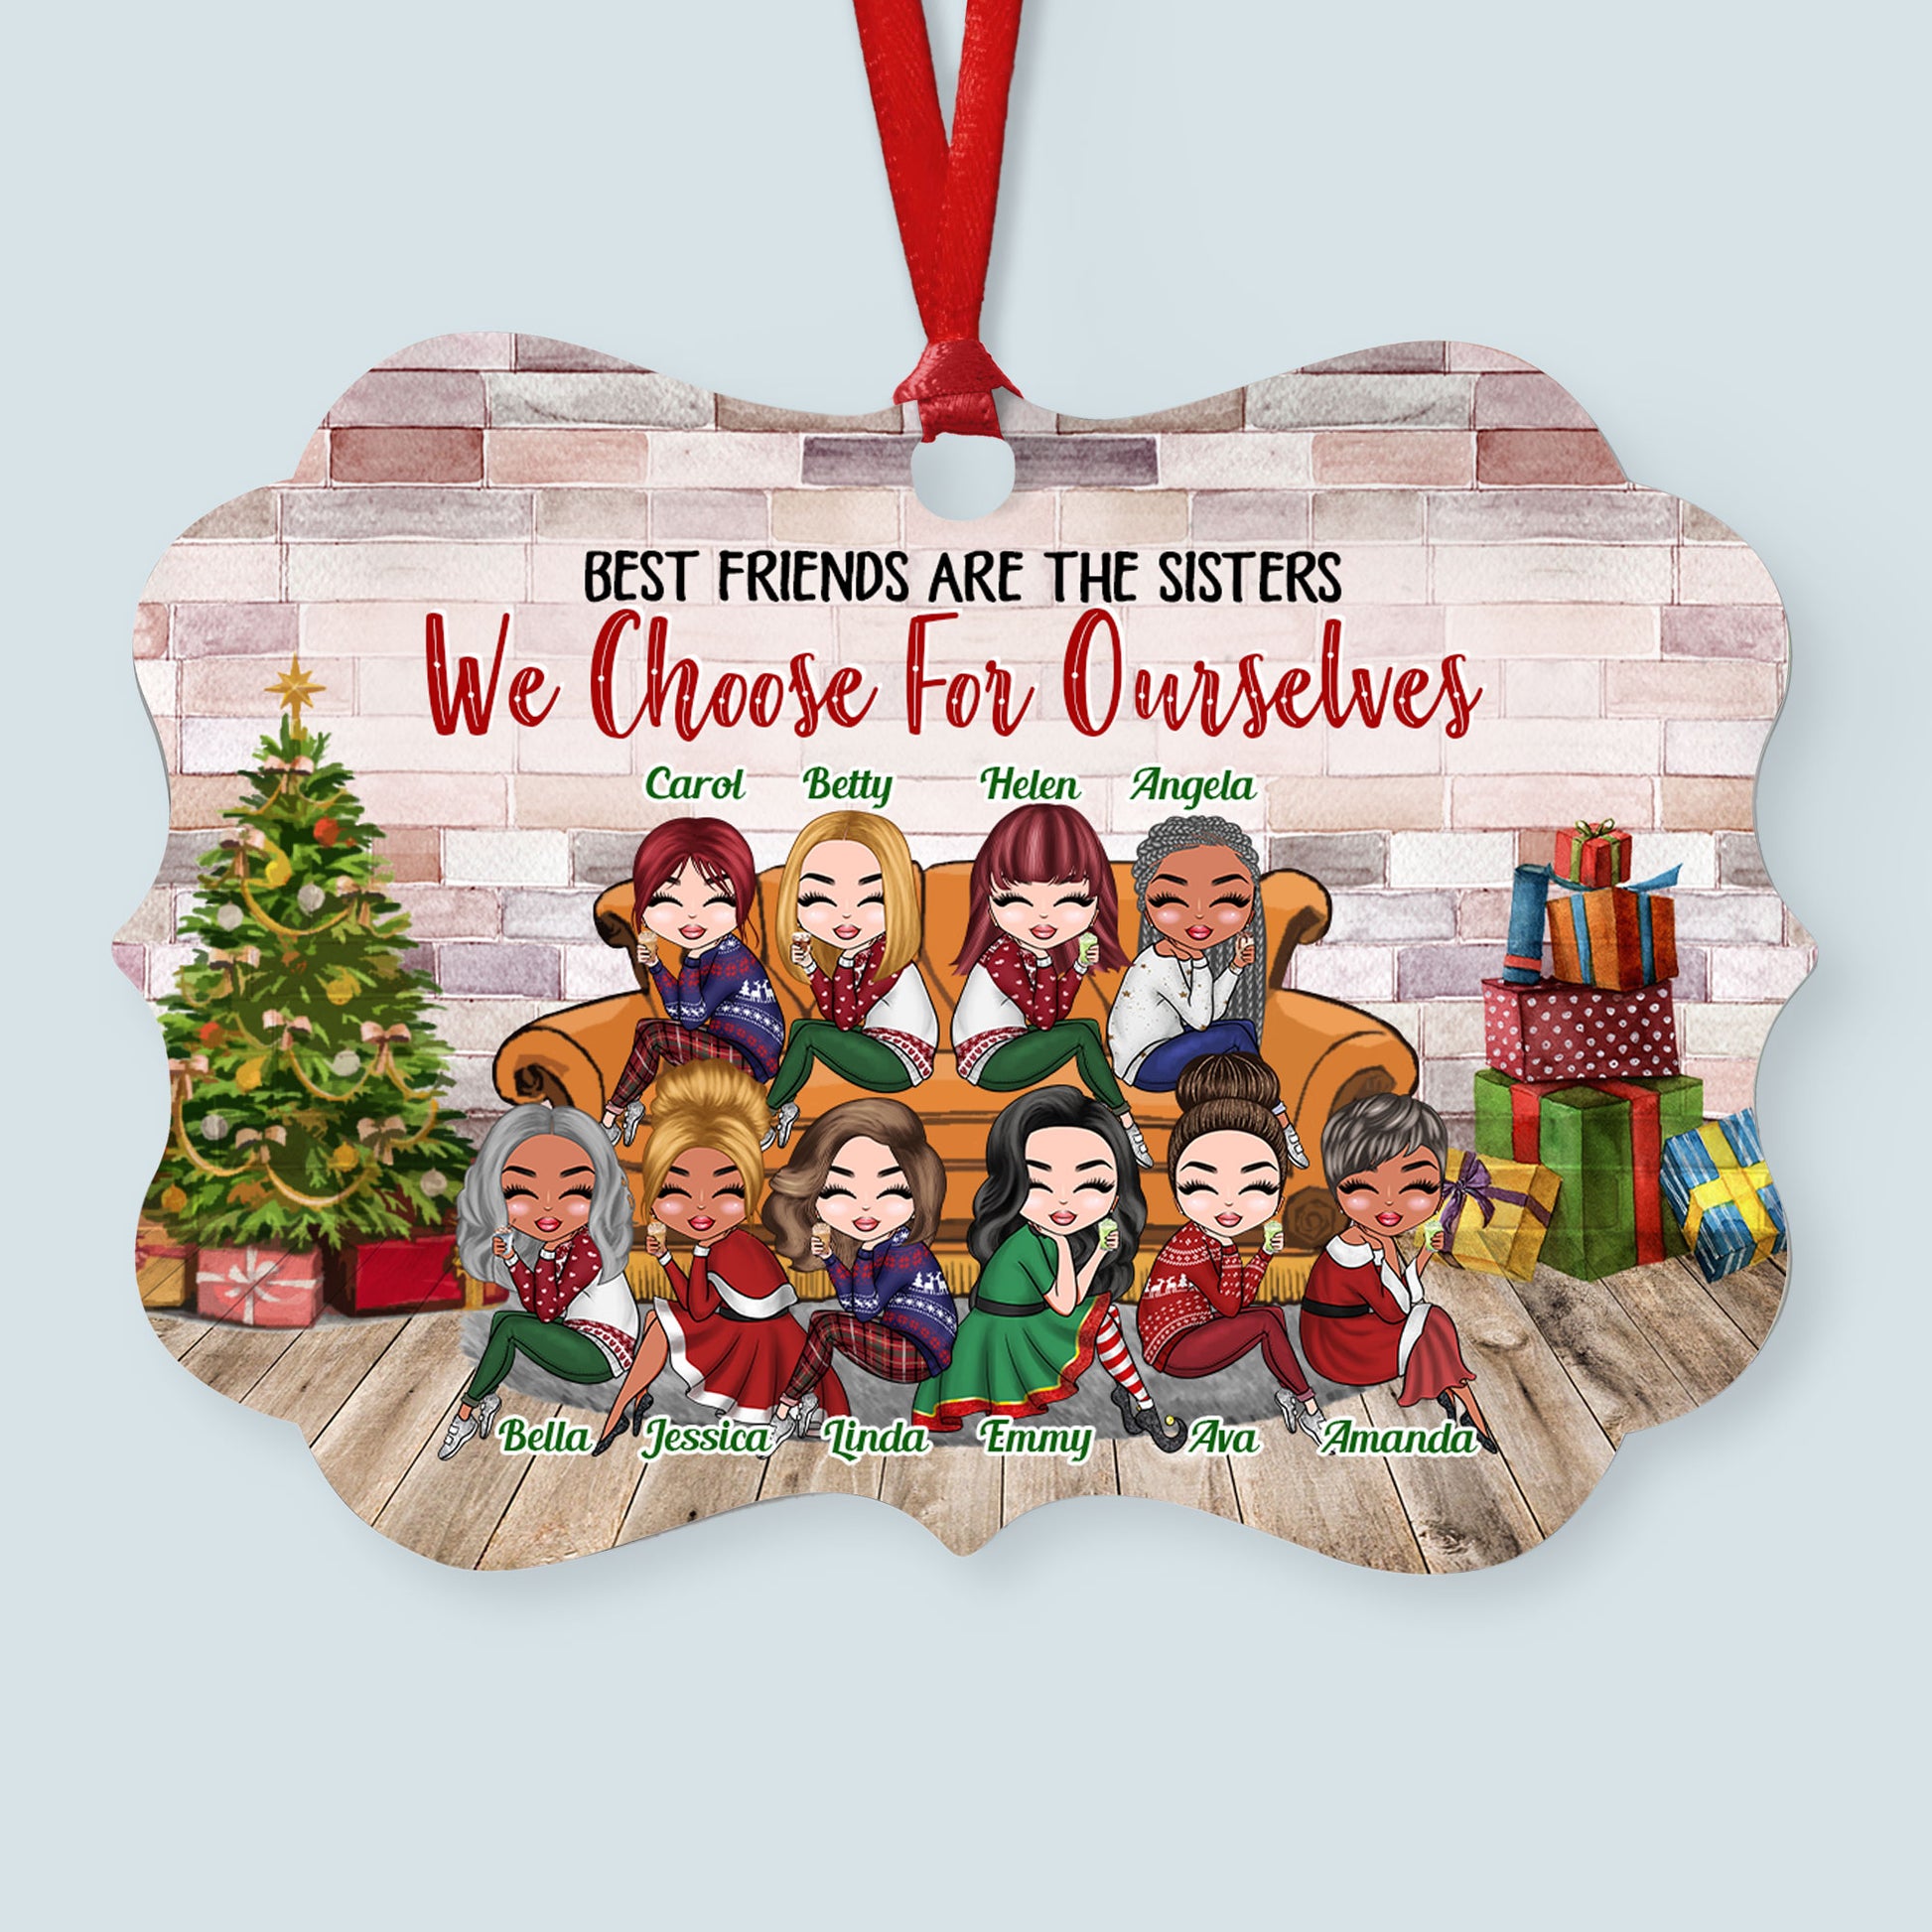 Best Friends Are The Sisters - Personalized Aluminum Ornament - Christmas Gift For Friends